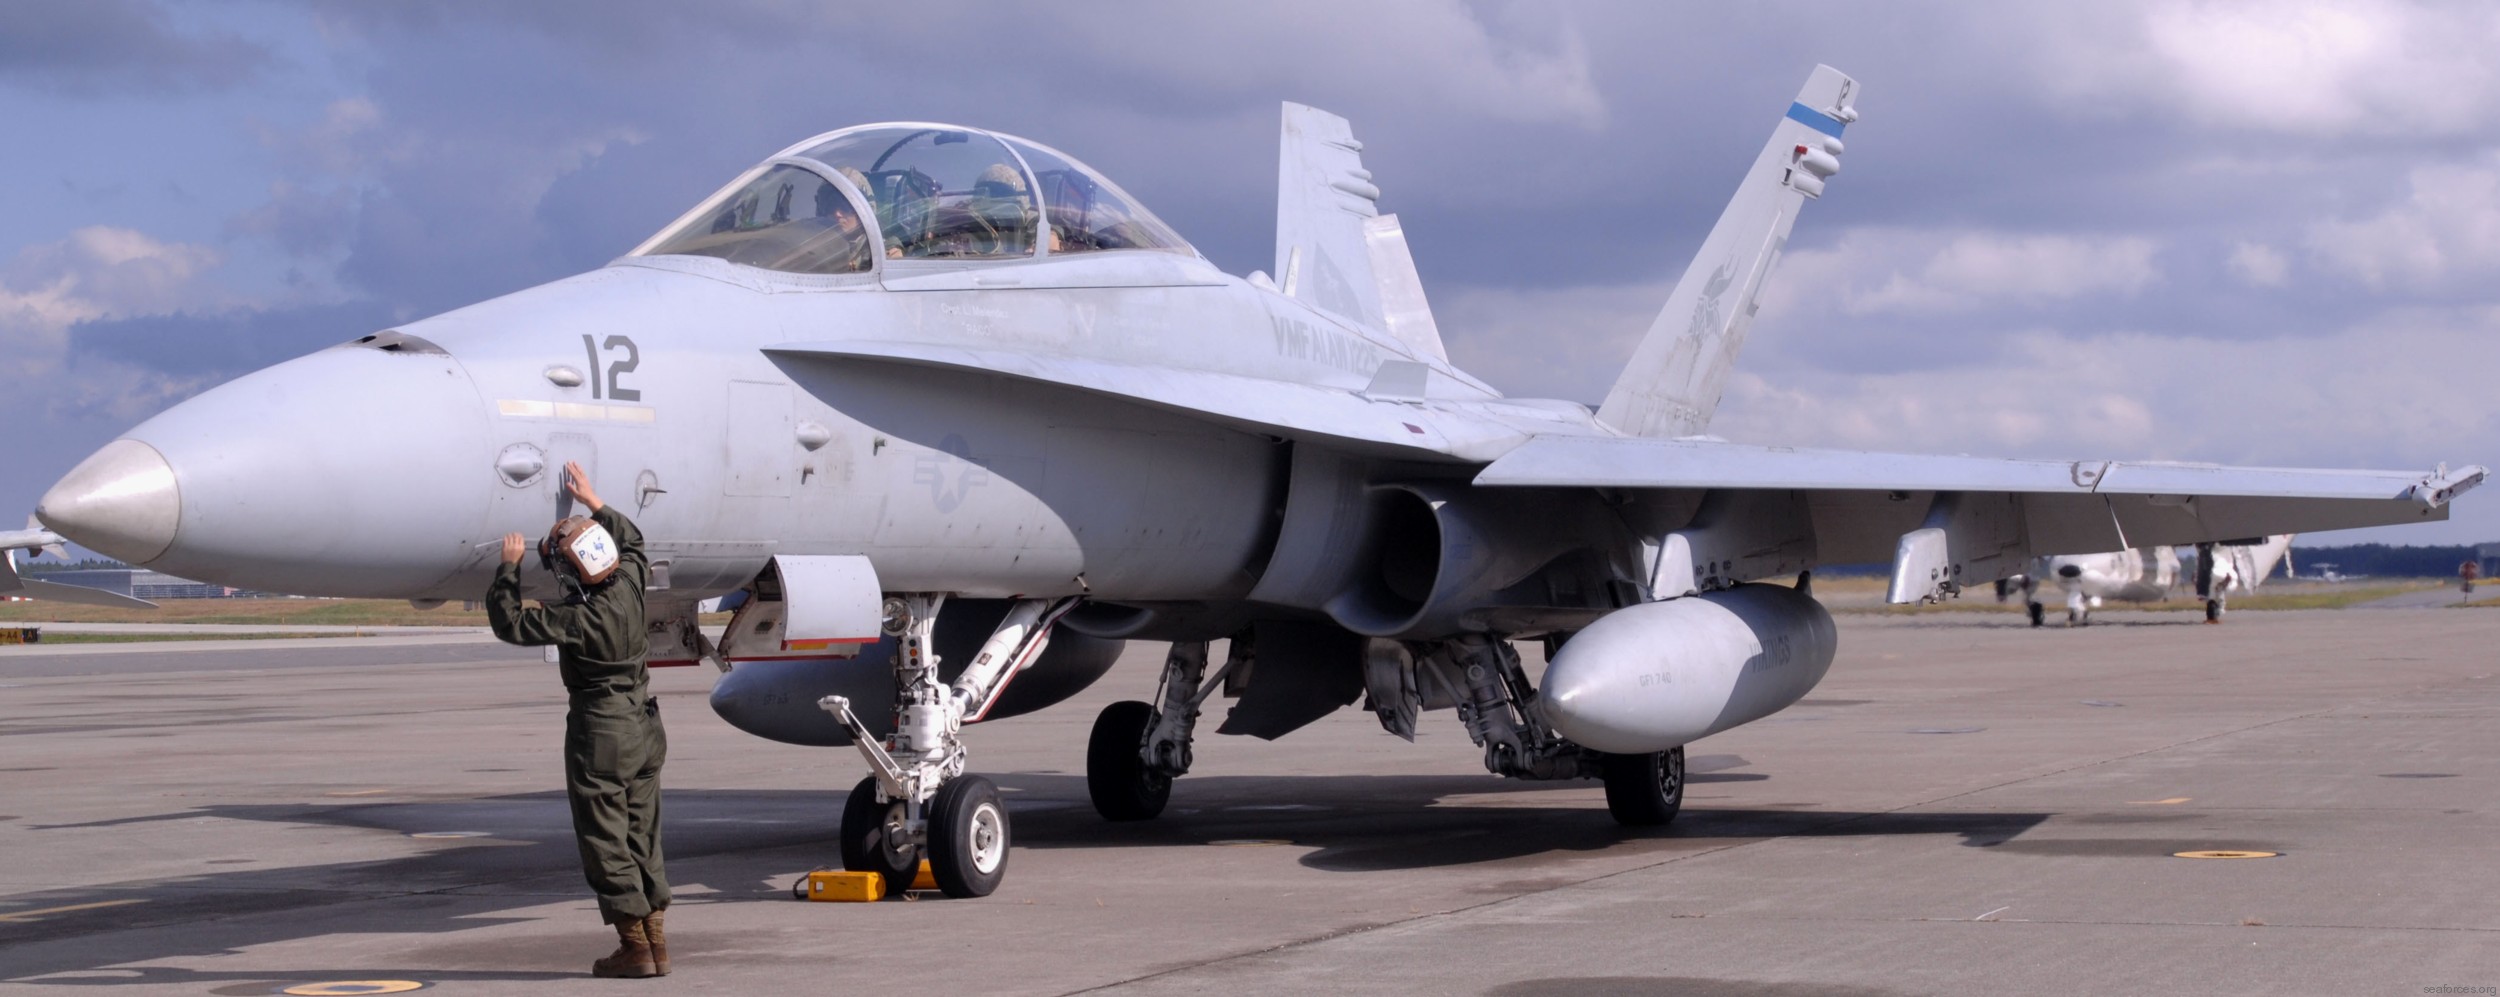 vmfa(aw)-225 vikings marine fighter attack squadron f/a-18d hornet 48 misawa airbase japan